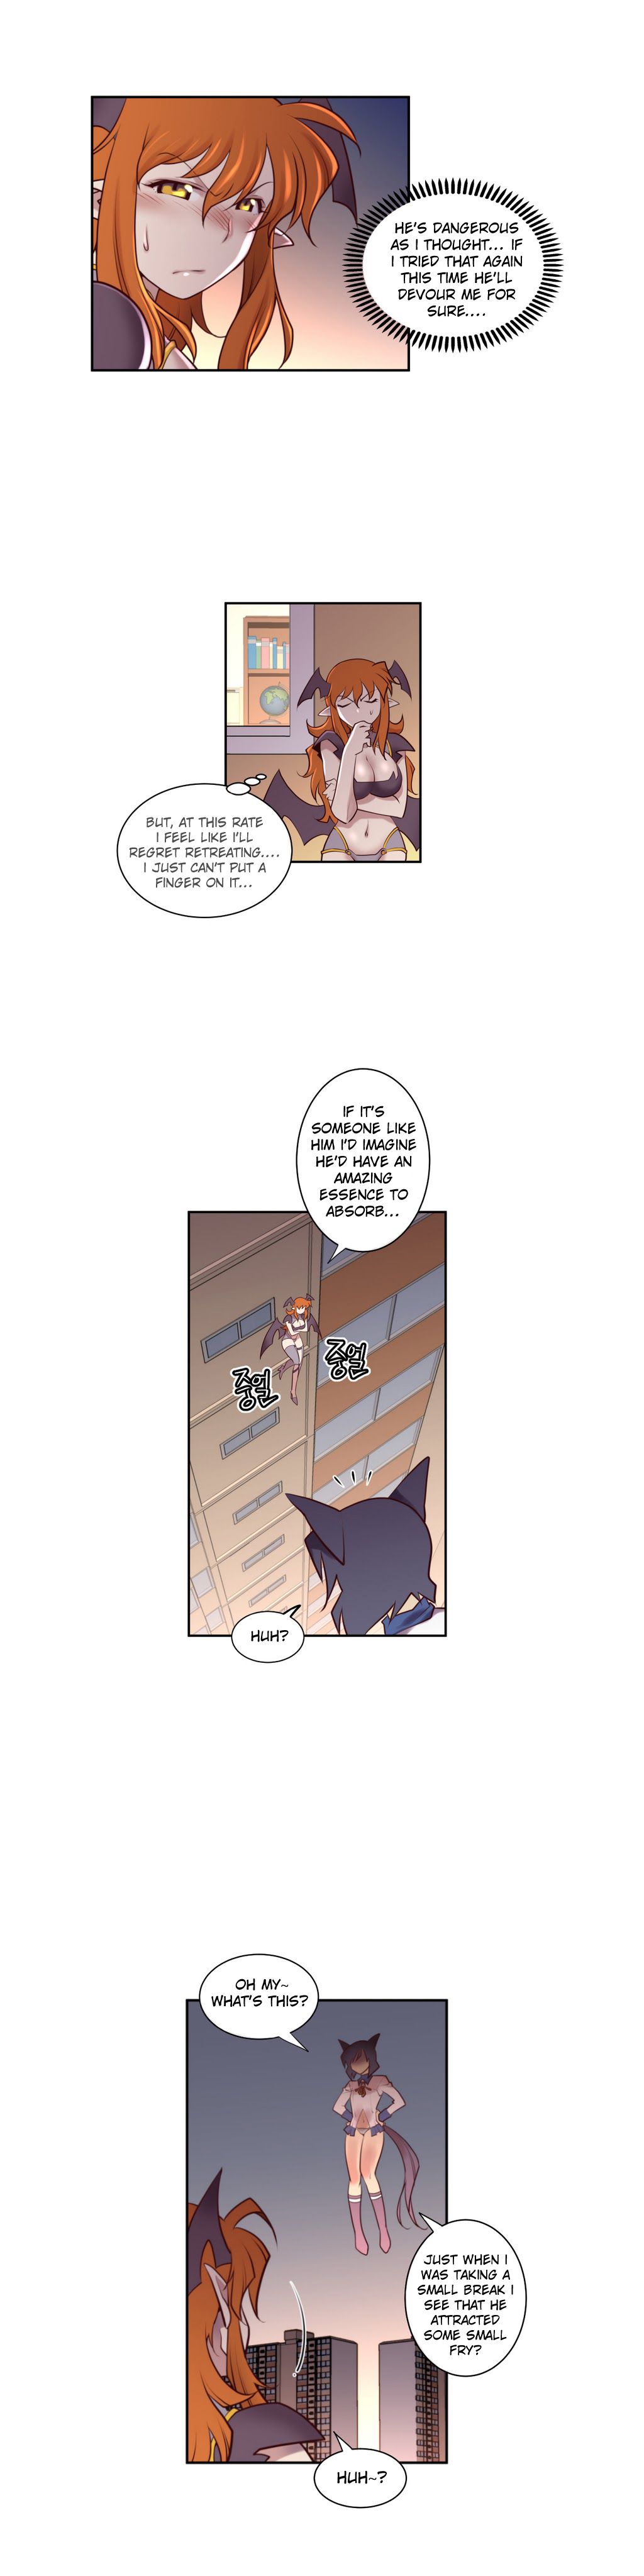 Master in My Dreams - Chapter 2 Page 4